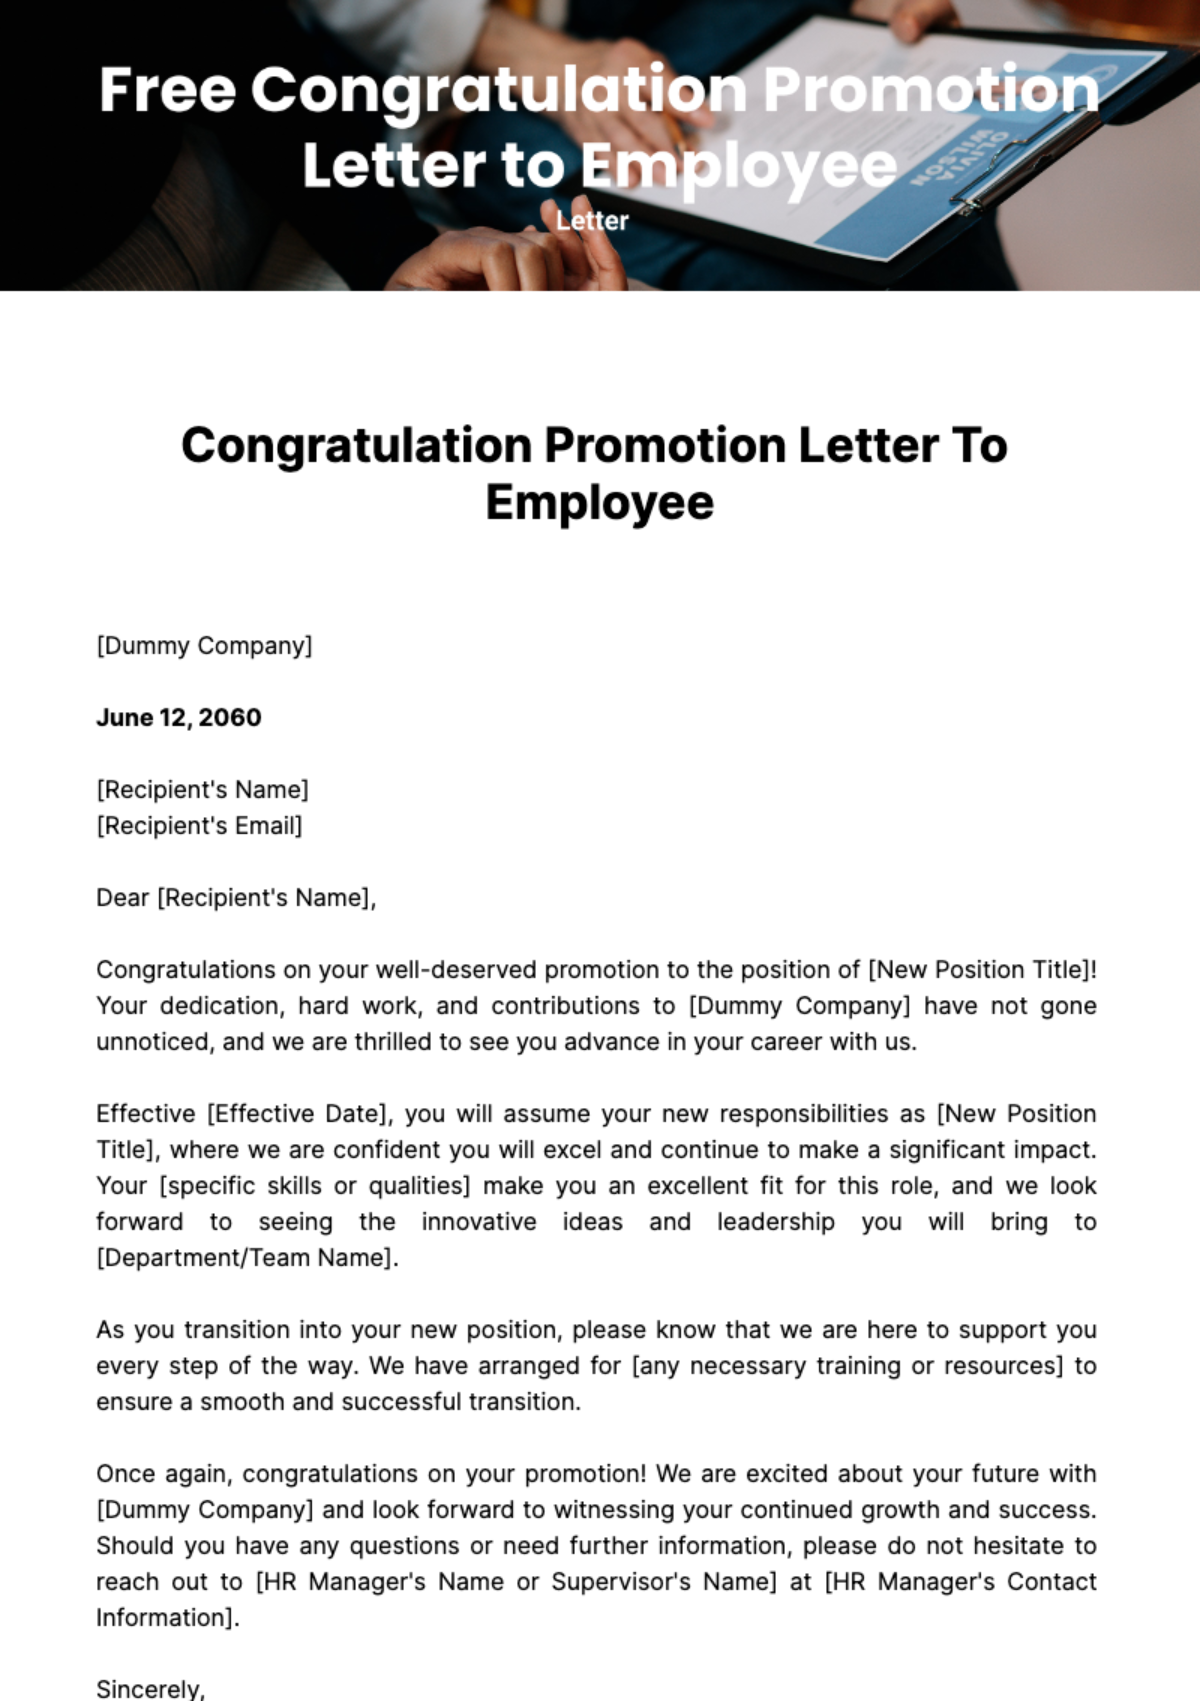 Free Congratulation Promotion Letter to Employee Template